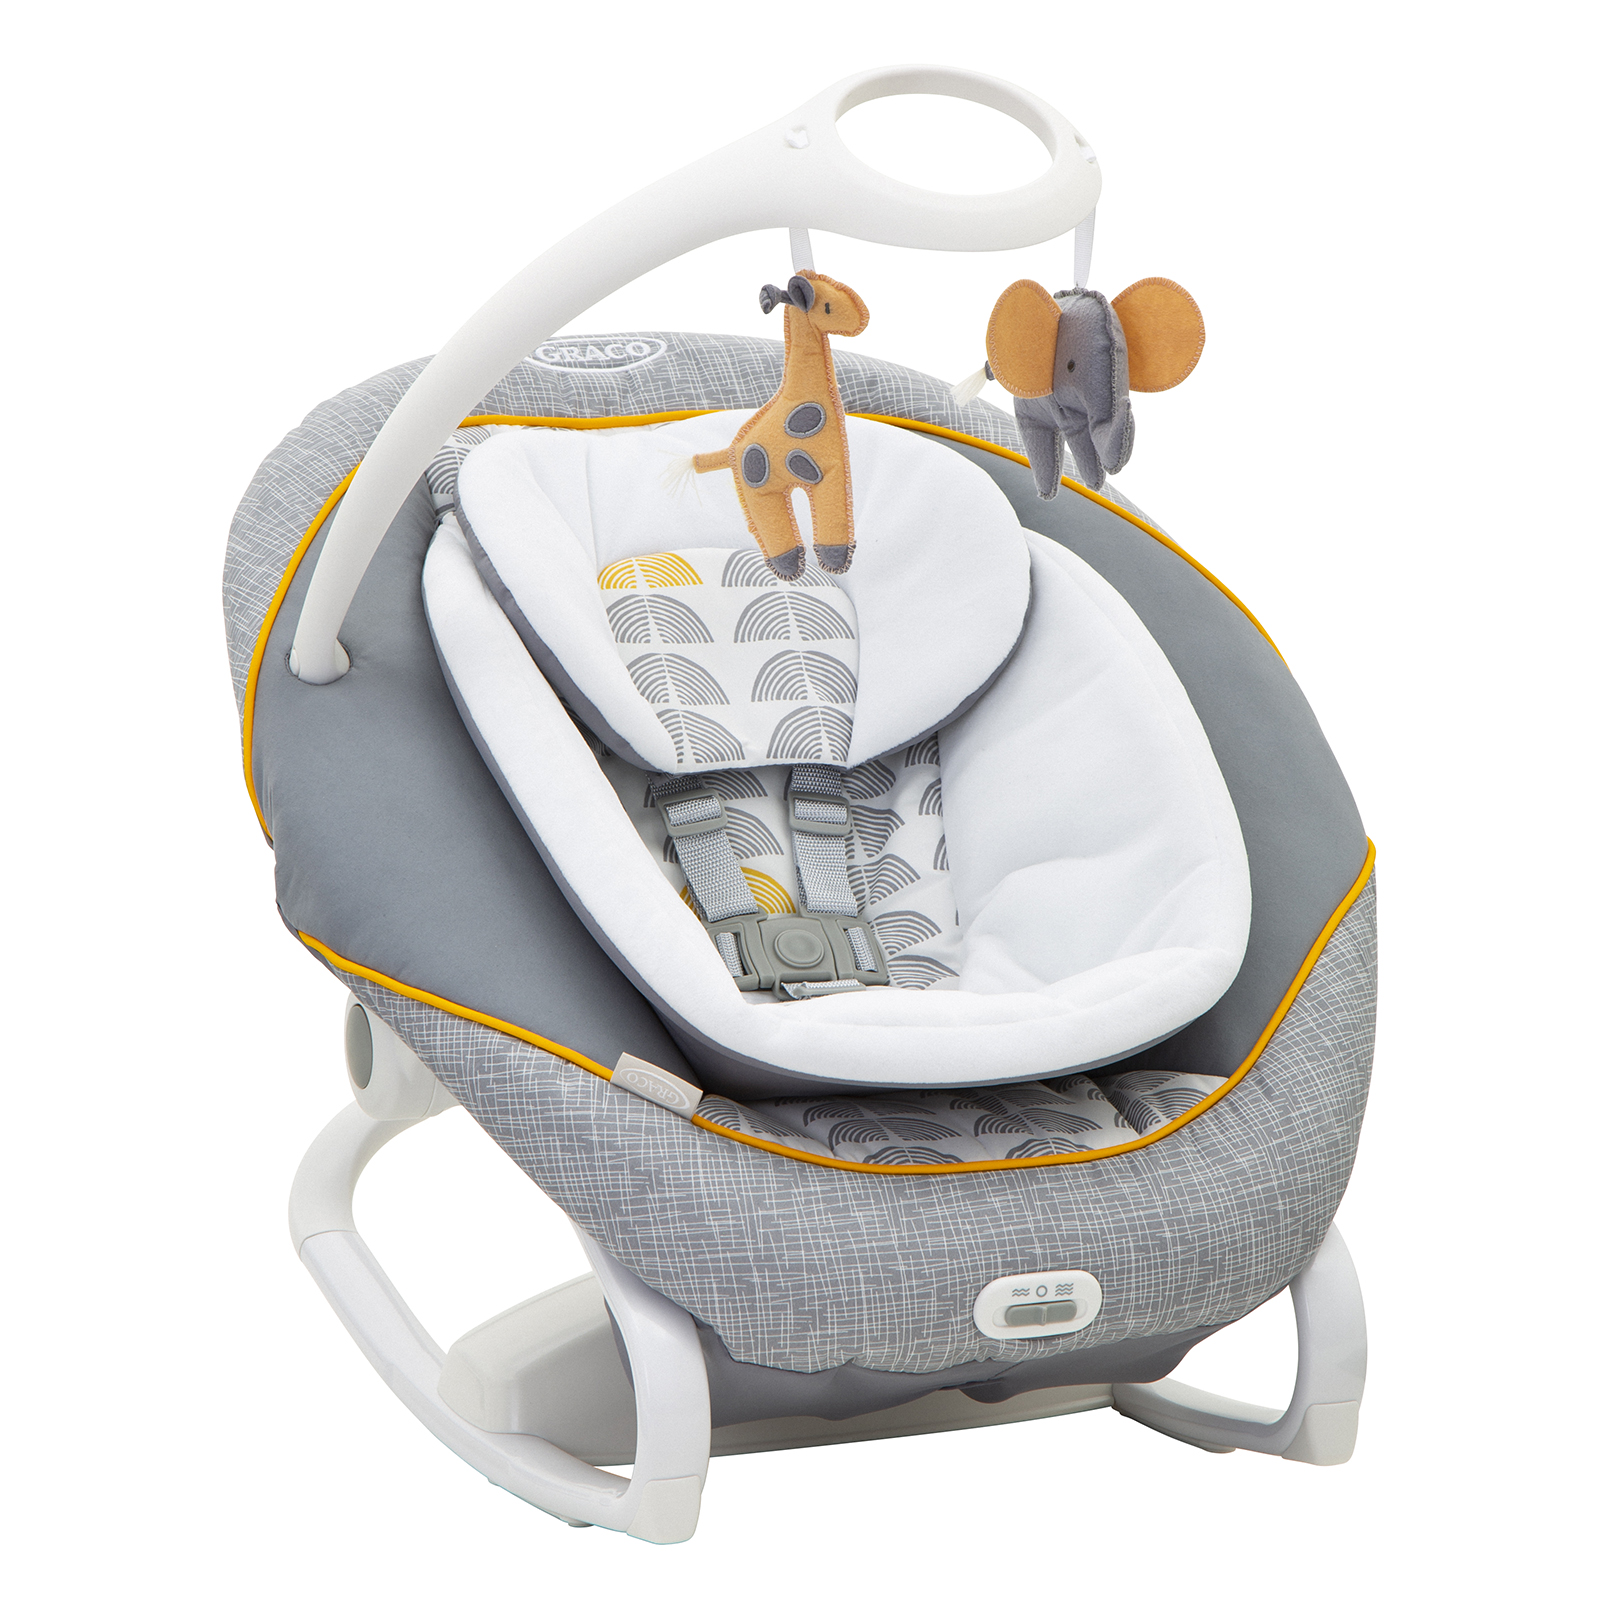 Graco 2in1 Horizon Soother Vibration / Ways Musical with Rocker | Grey Buy – & at Swing Online4baby All Sounds